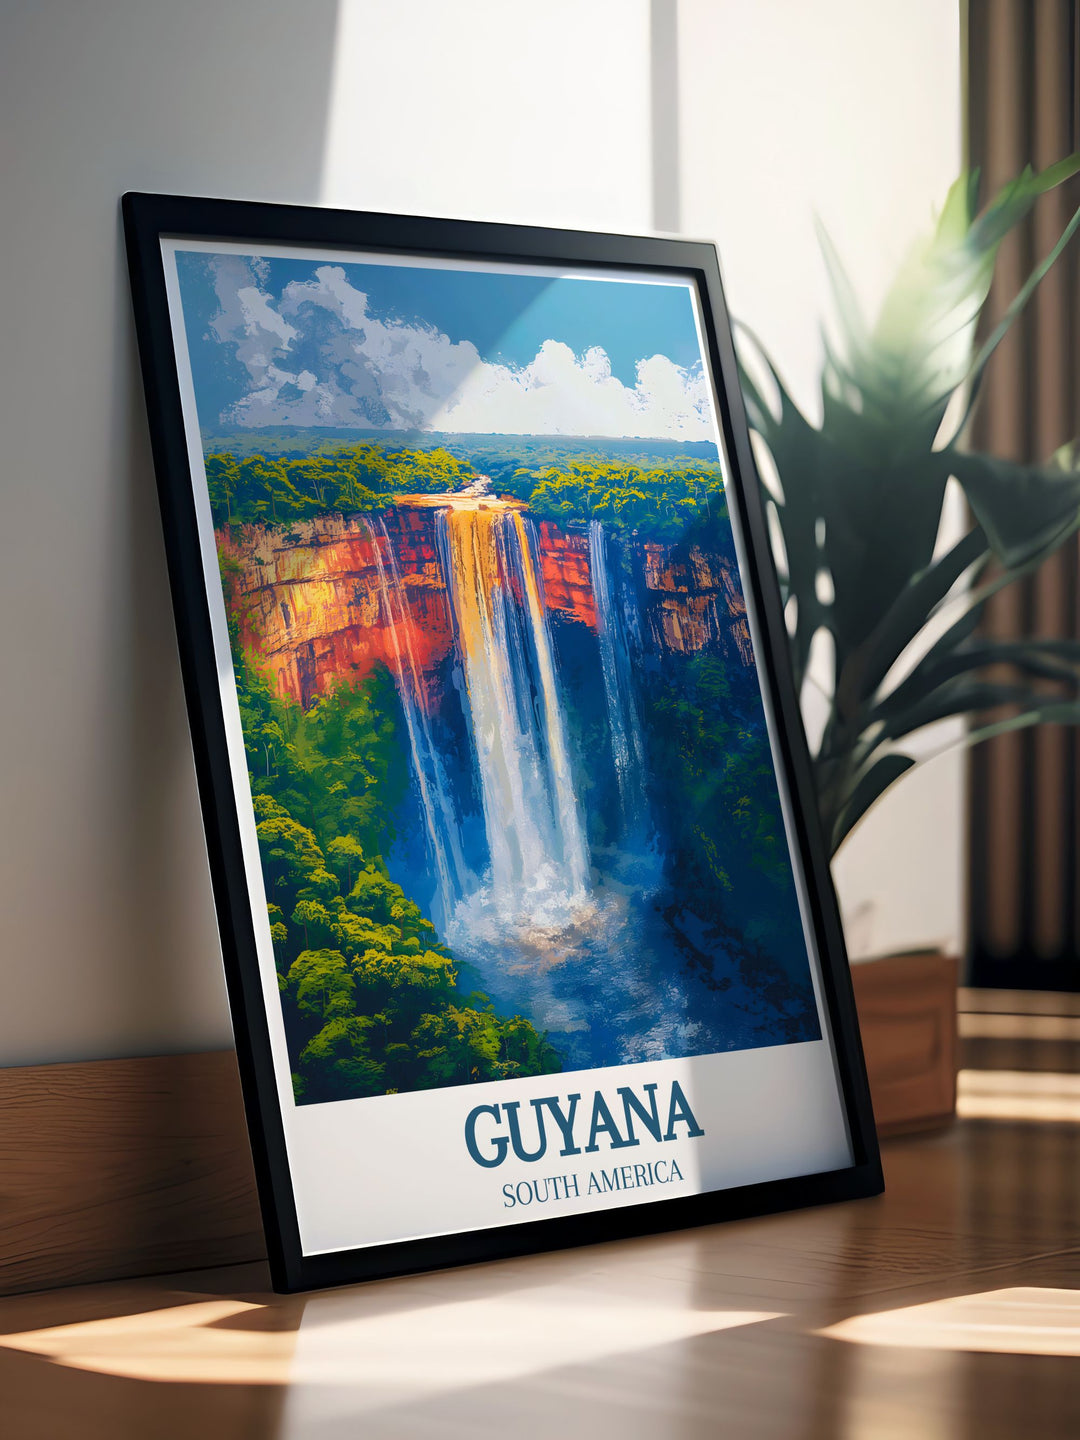 This art print of Guyana features the powerful Kaieteur Falls and vibrant Amazon basin, providing a detailed and picturesque view of one of South Americas most beautiful regions.